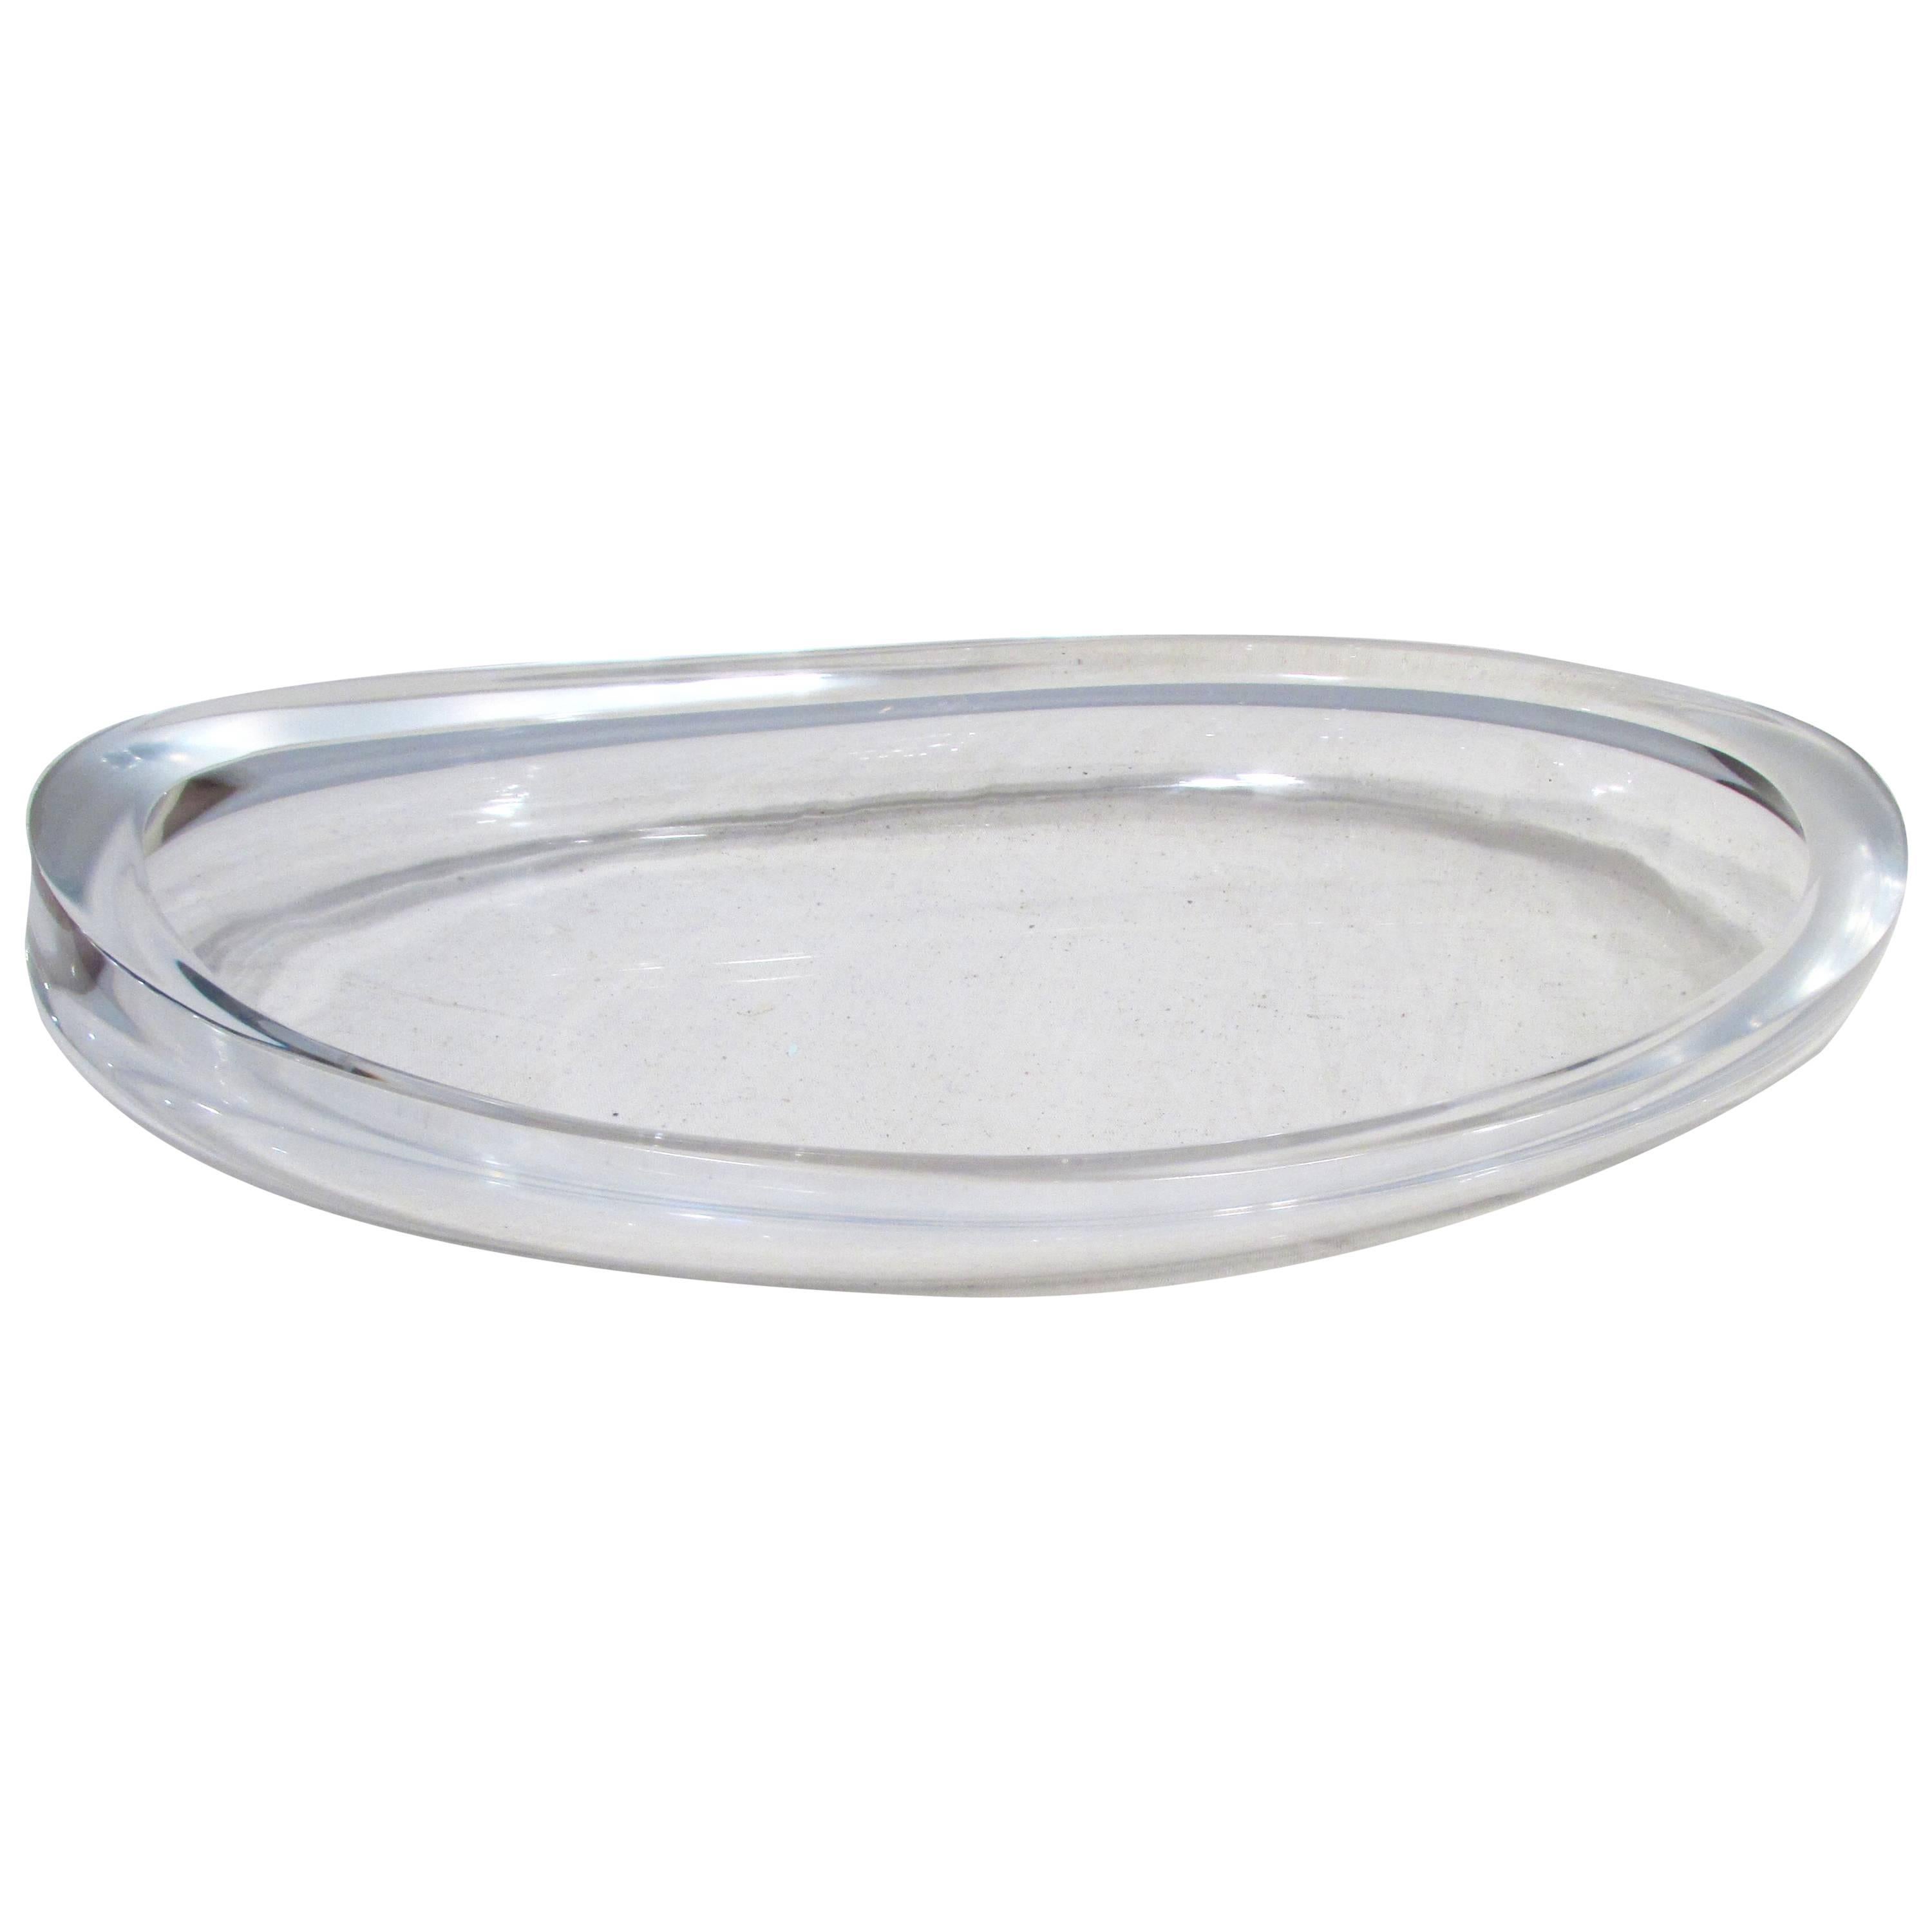 Large Lucite Oval Bowl